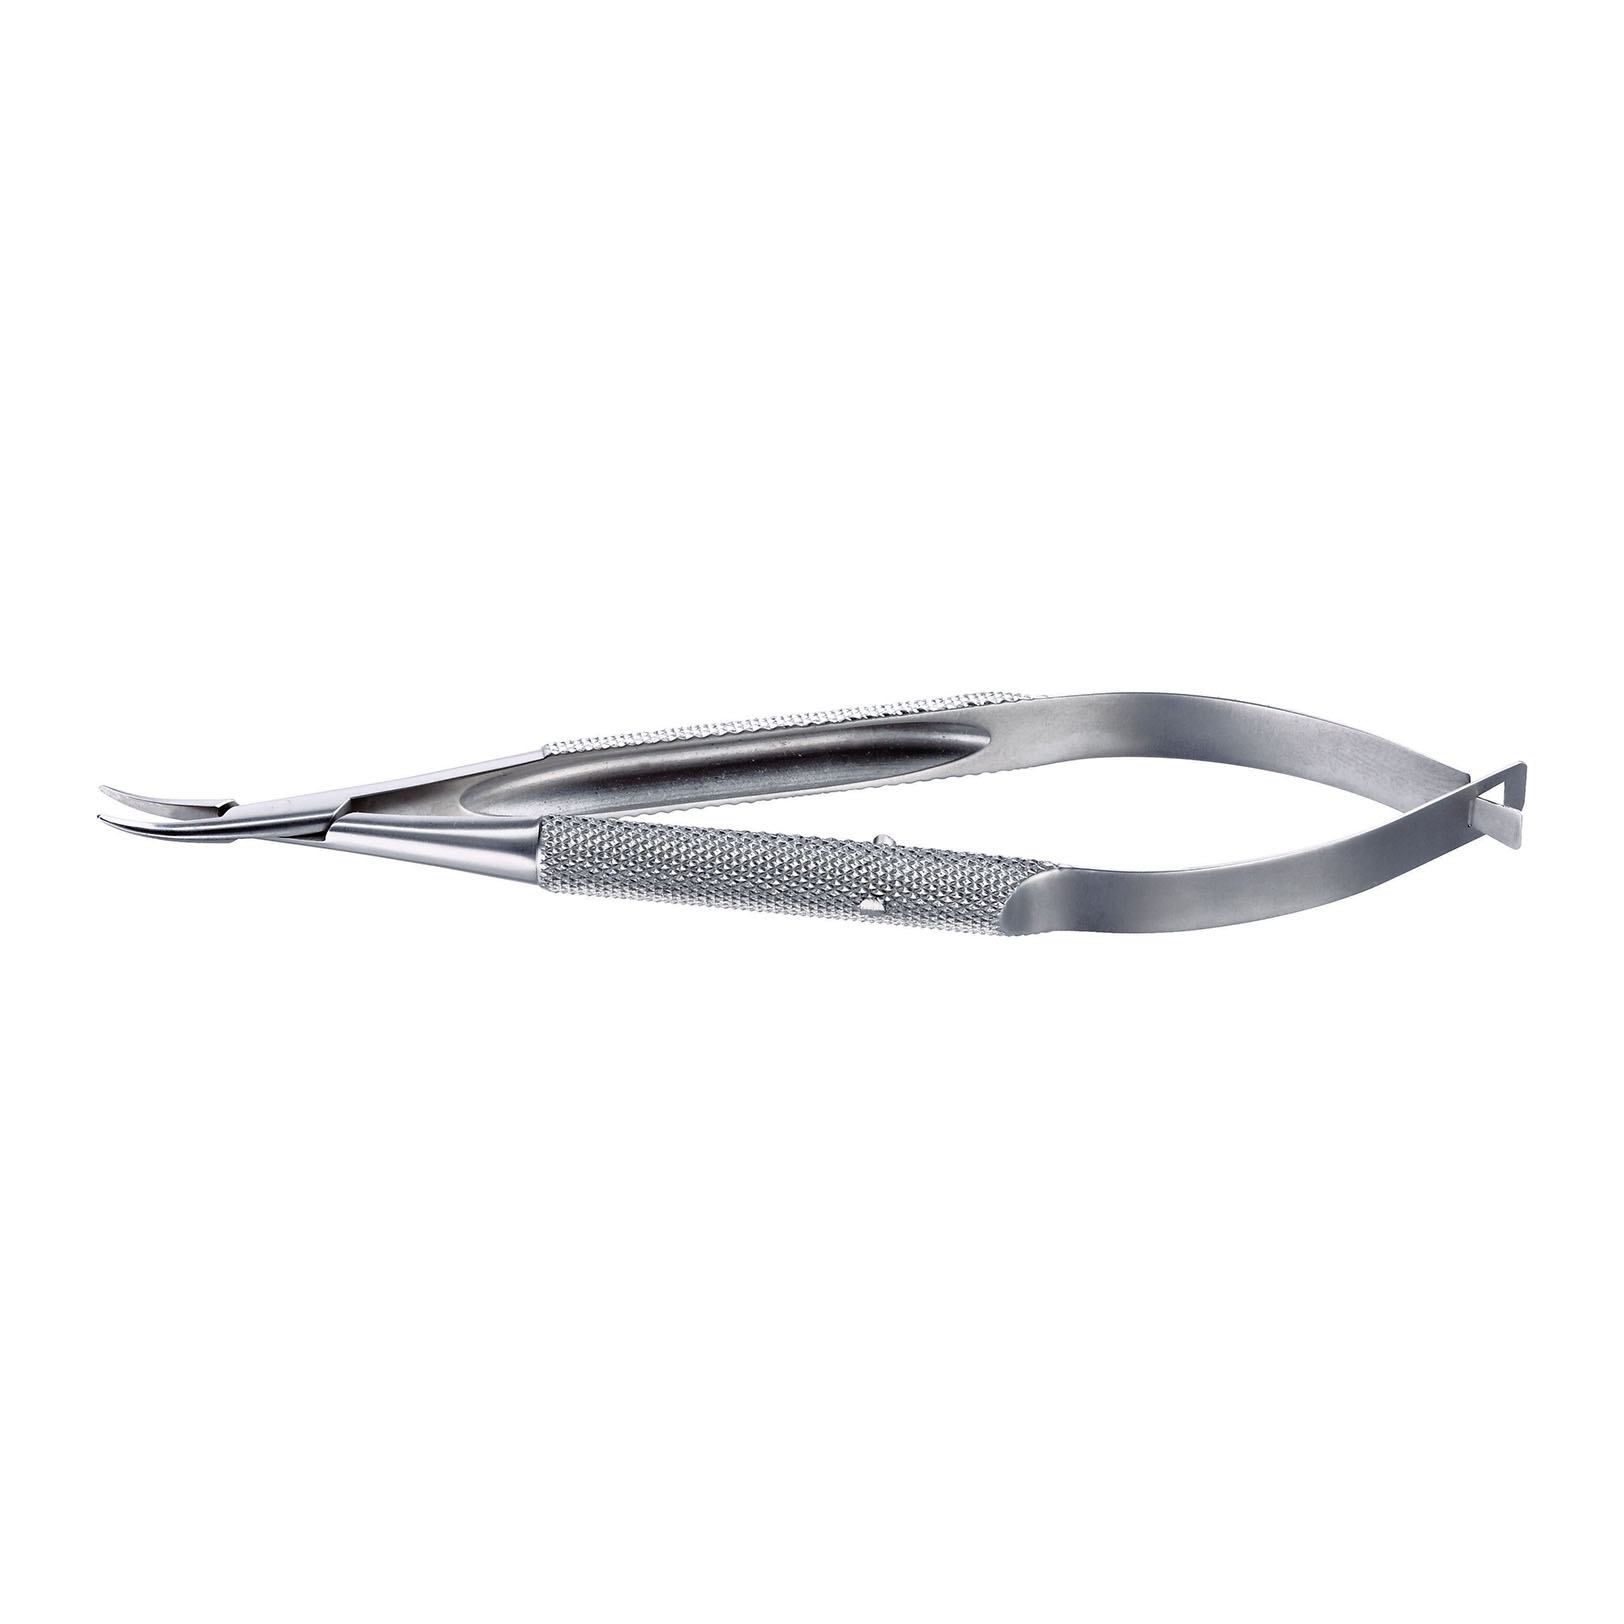 IF-6012 Stainless Steel Mini Barraquer Needle Holder　